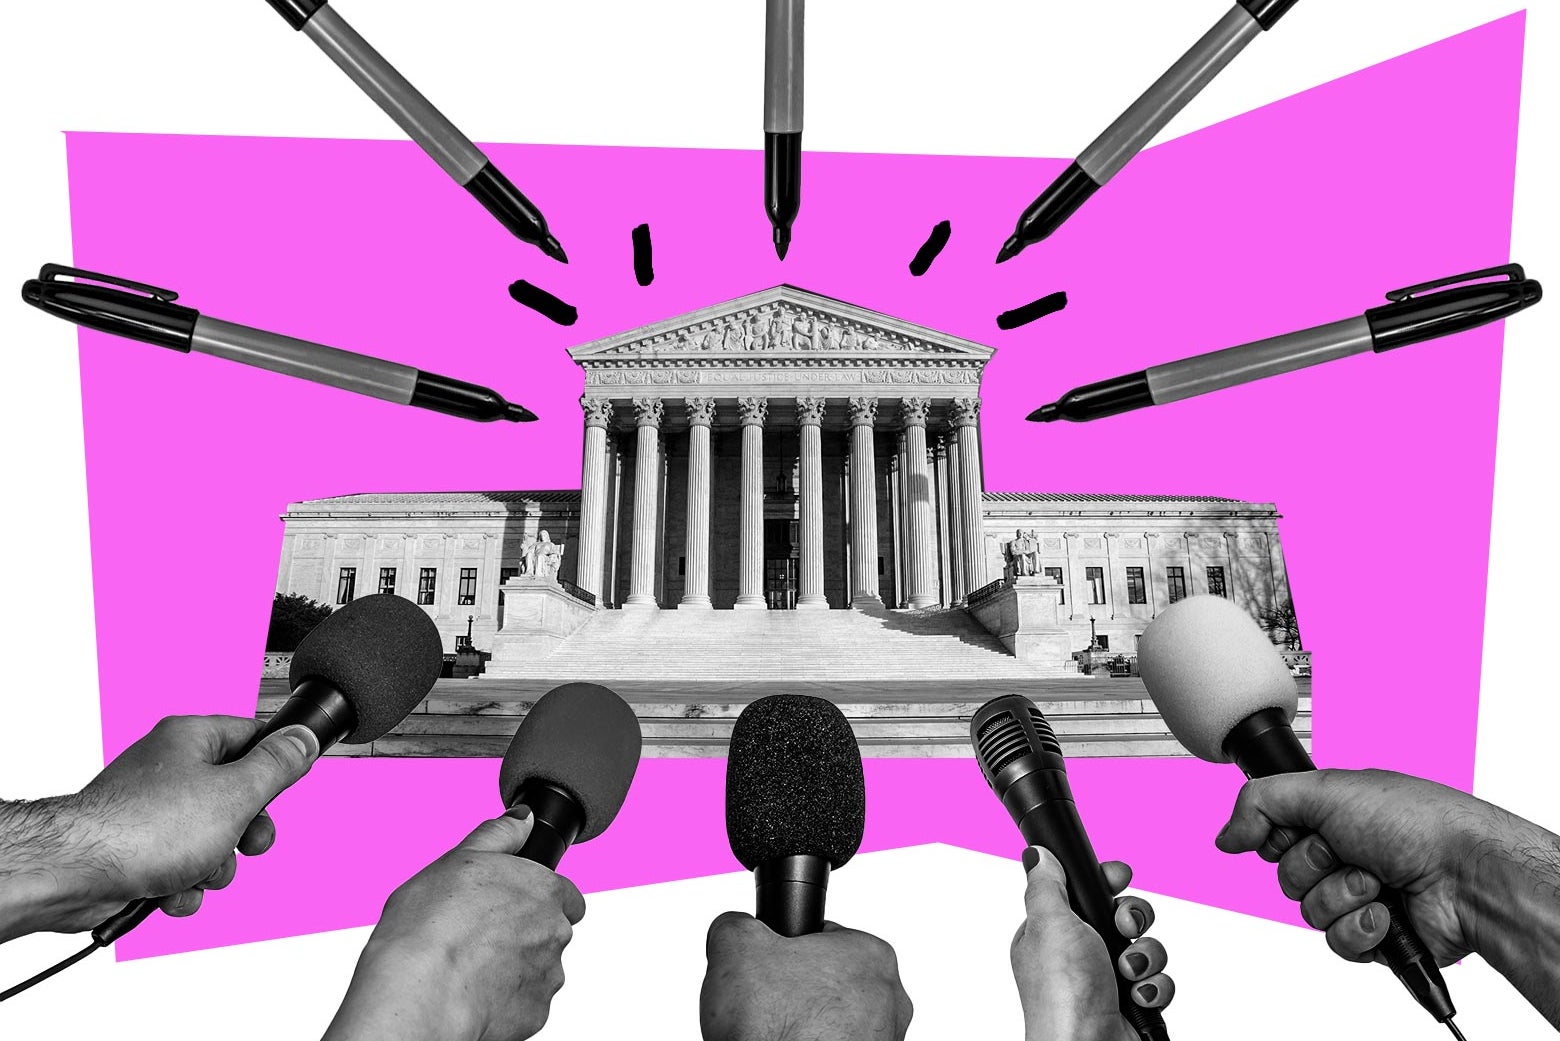 the exterior of the U.S. Supreme Court, with a row of reporters' hands holding microphones toward the building, and several Sharpies drawing lines around the top 